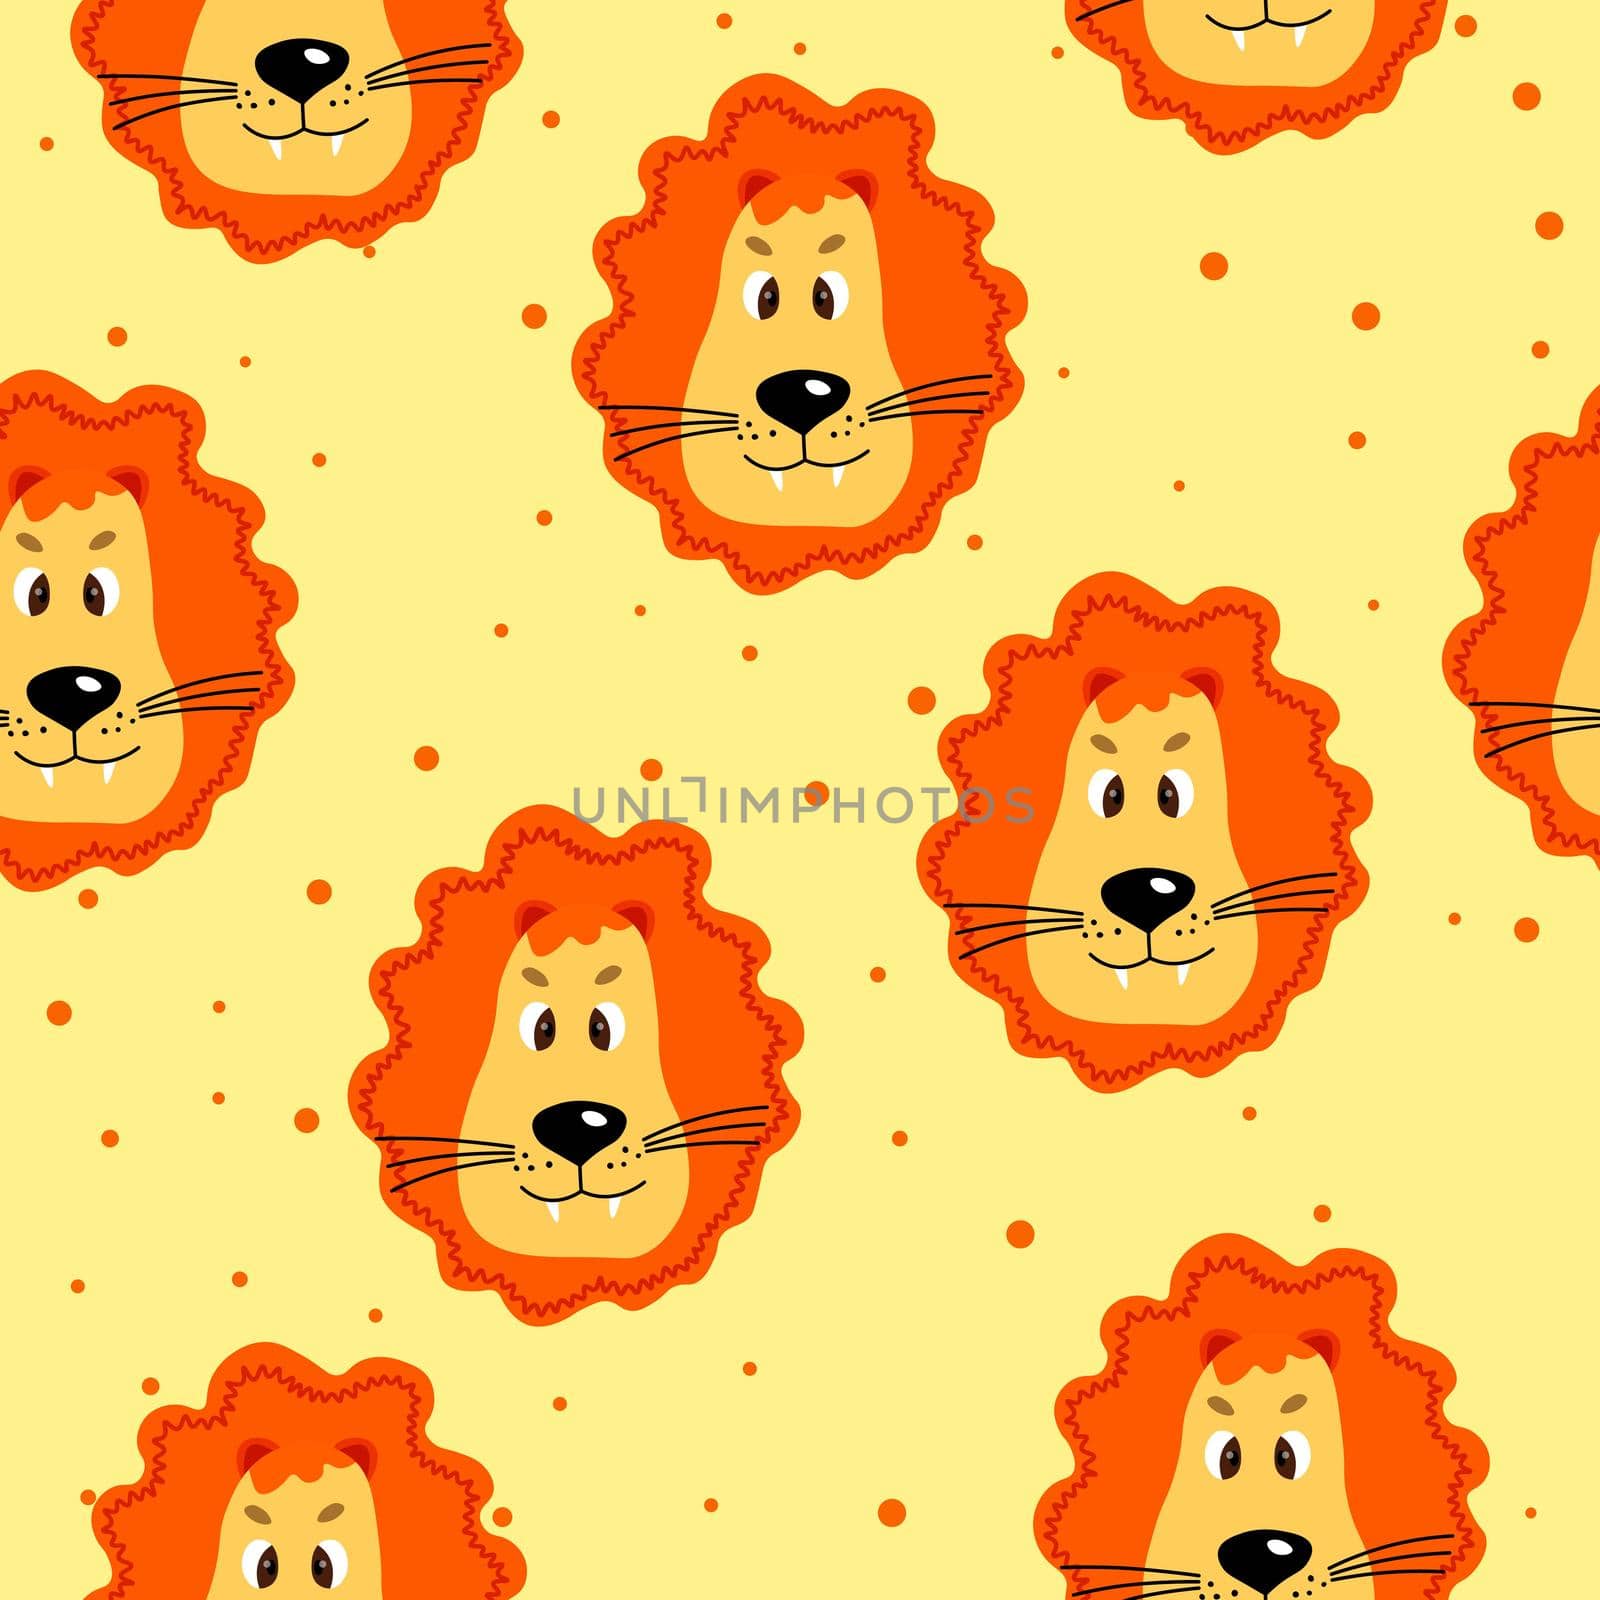 Vector flat animals colorful illustration for kids. Seamless pattern with cute lion face on yellow polka dots background. Adorable cartoon character. Design for textures, card, poster, fabric, textile by allaku